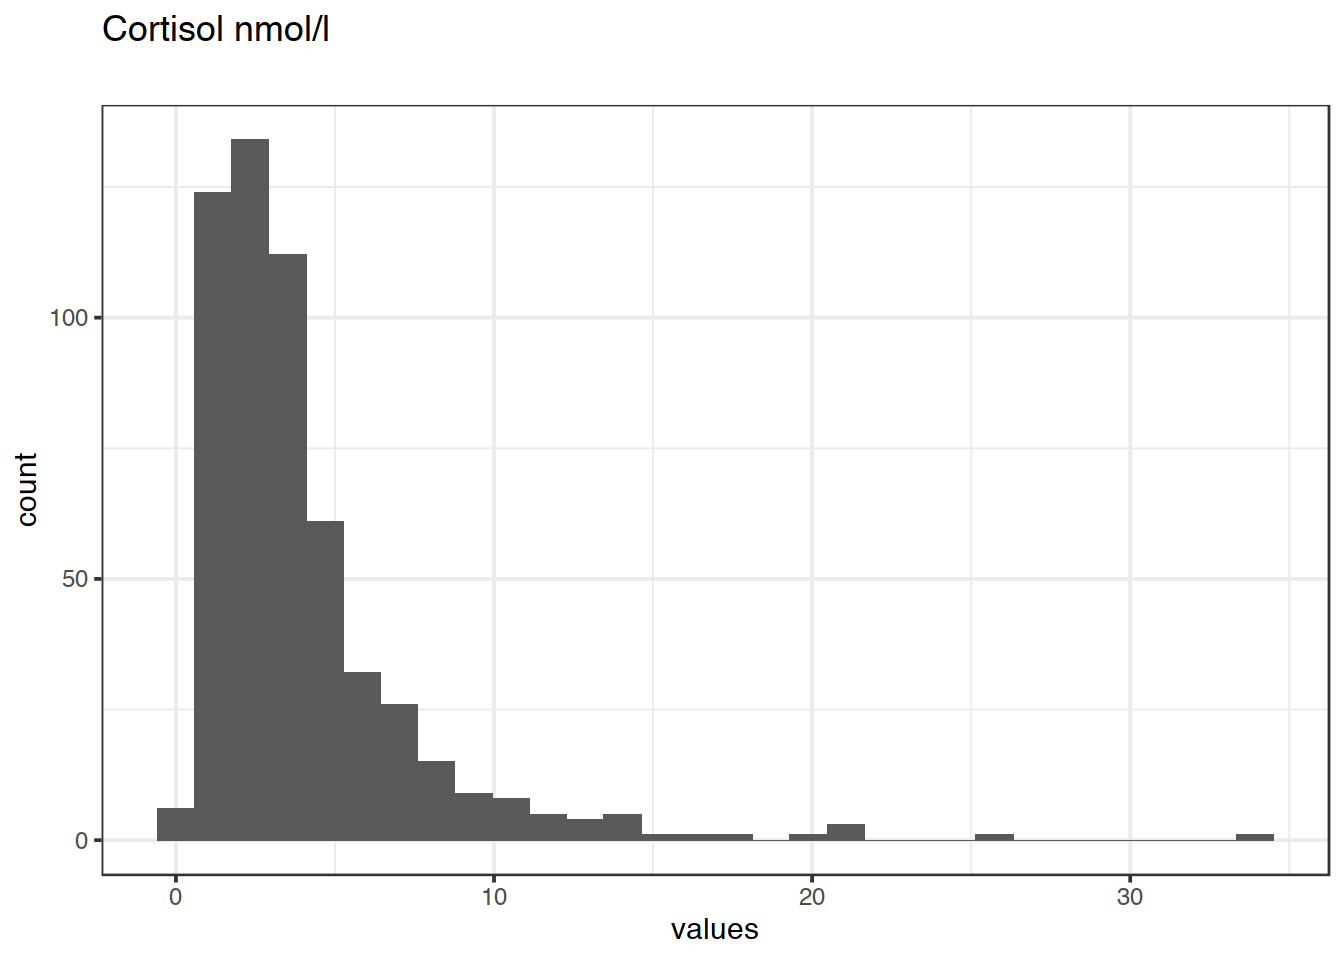 Distribution of values for Cortisol nmol/l